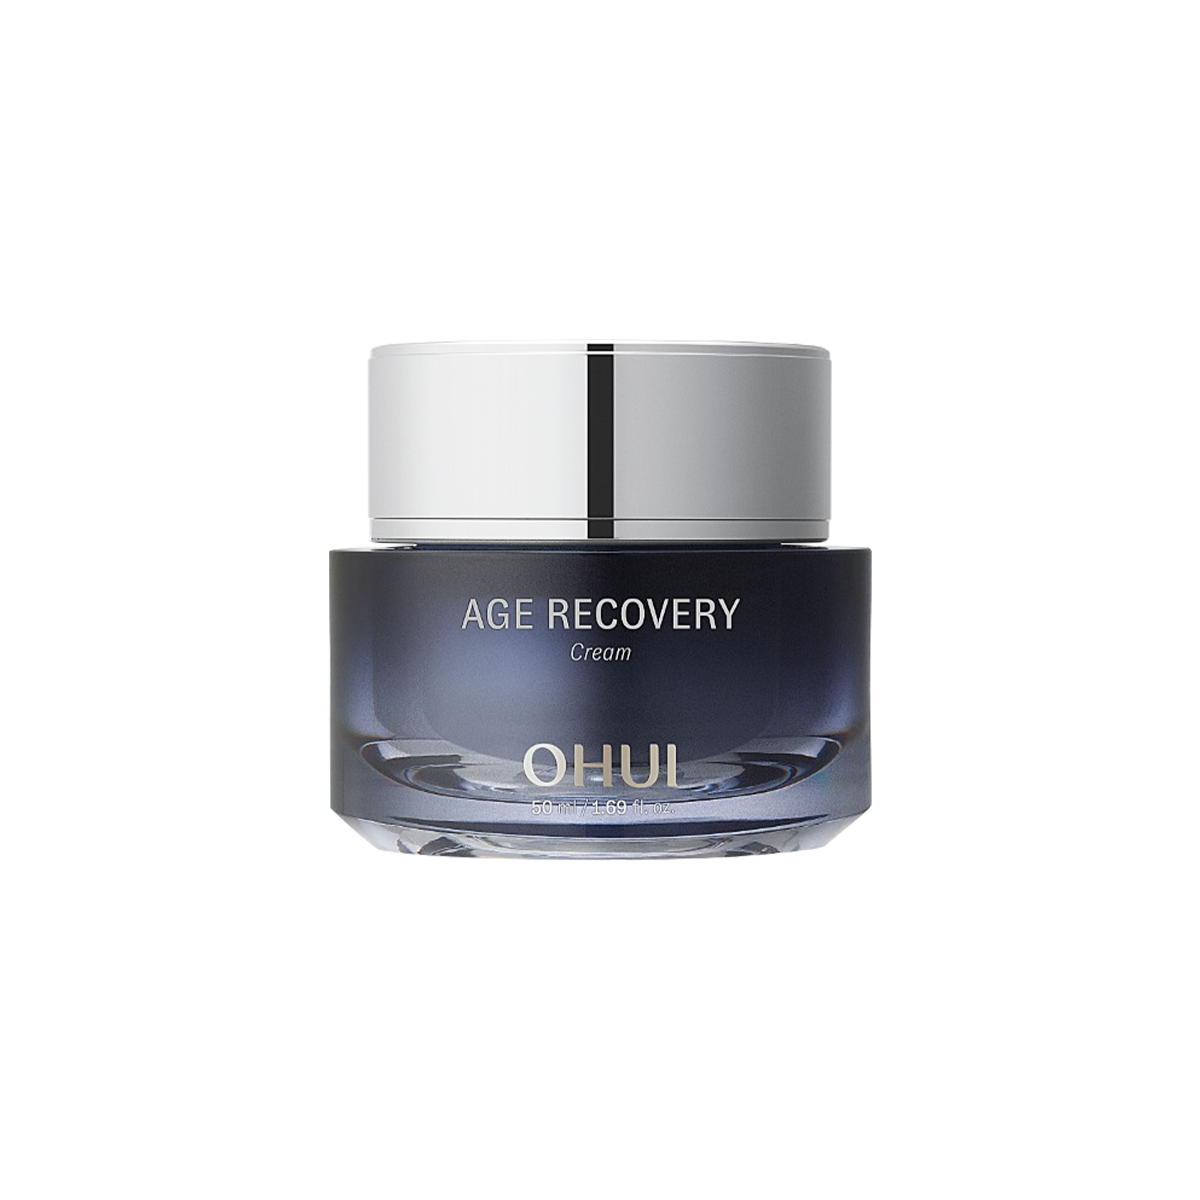 O HUI Age Recovery Cream: Anti-Aging Moisturizer, 50ml - A powerful formula to combat signs of aging and hydrate skin.